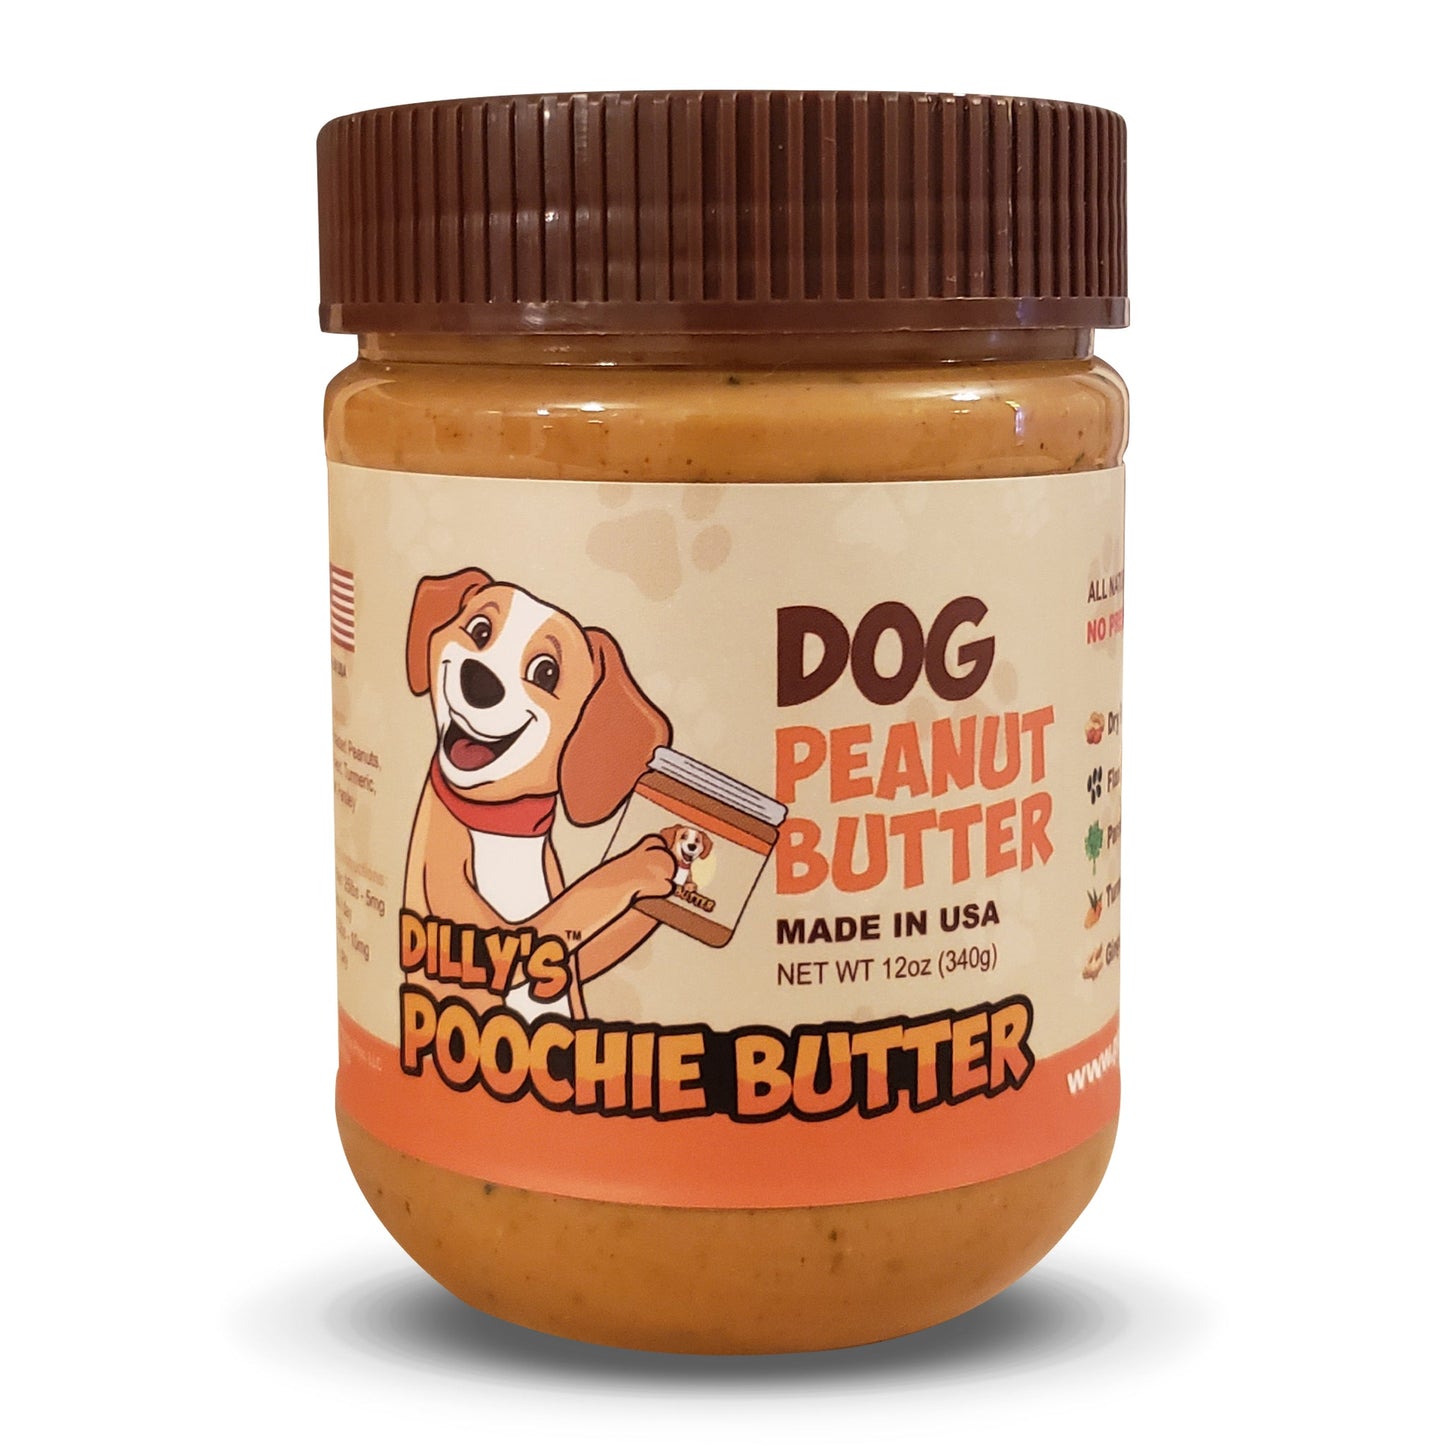 Dilly's Poochie Butter